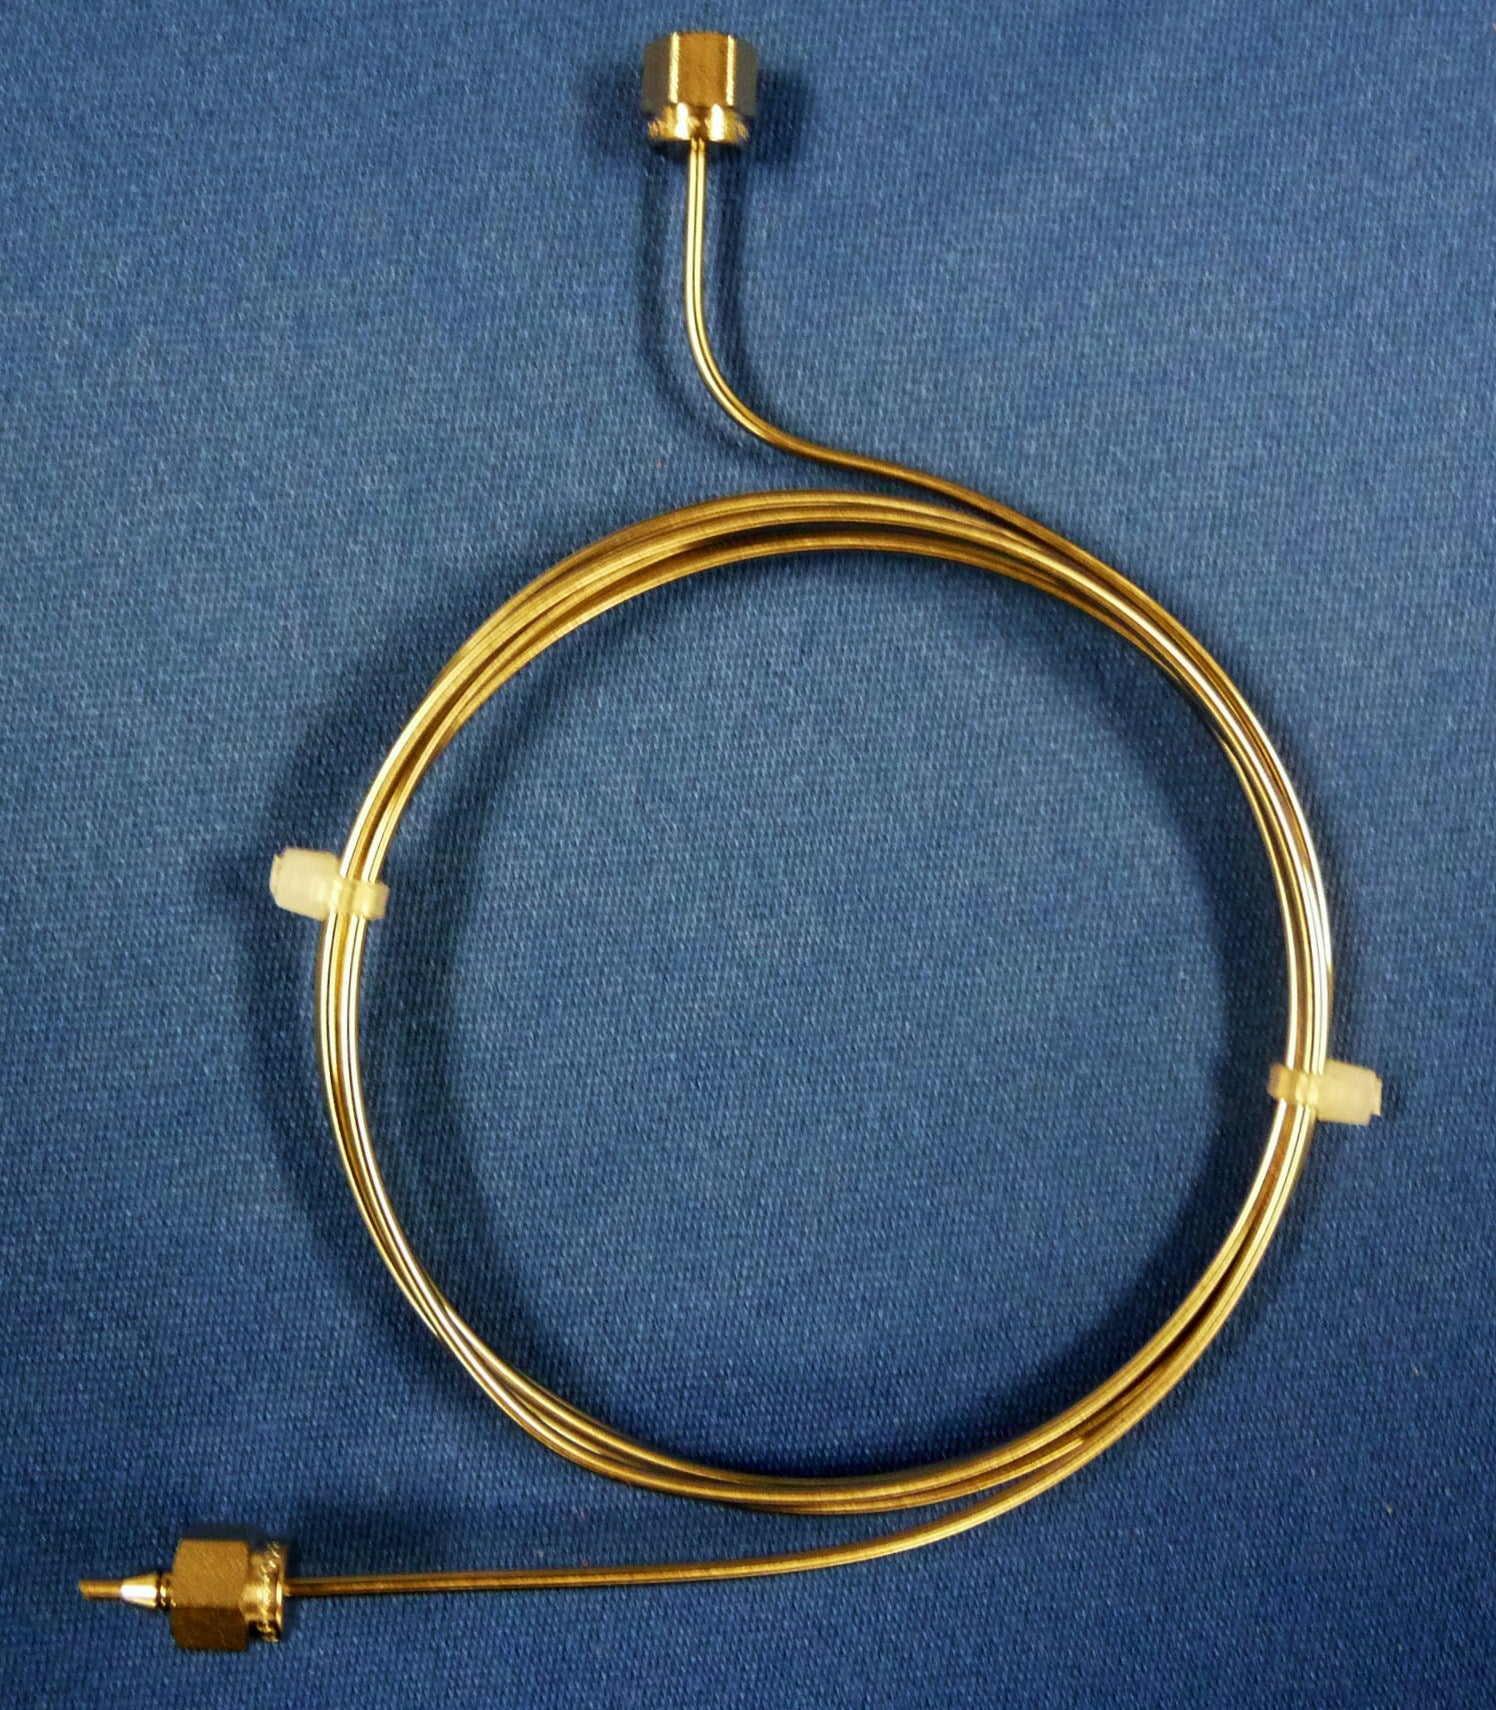 A gold wire with a needle